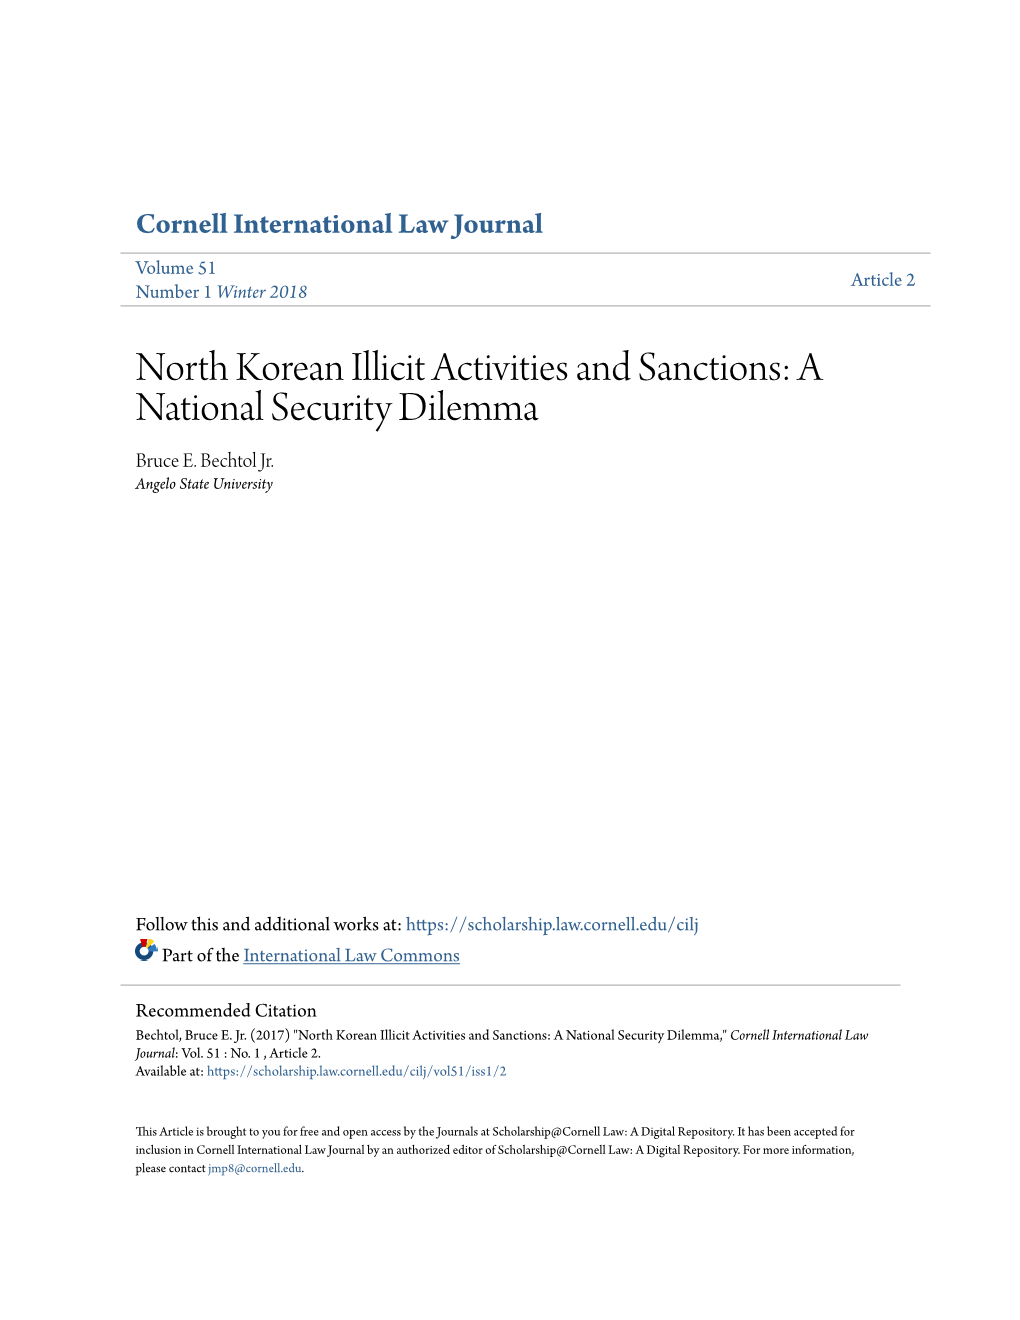 North Korean Illicit Activities and Sanctions: a National Security Dilemma Bruce E